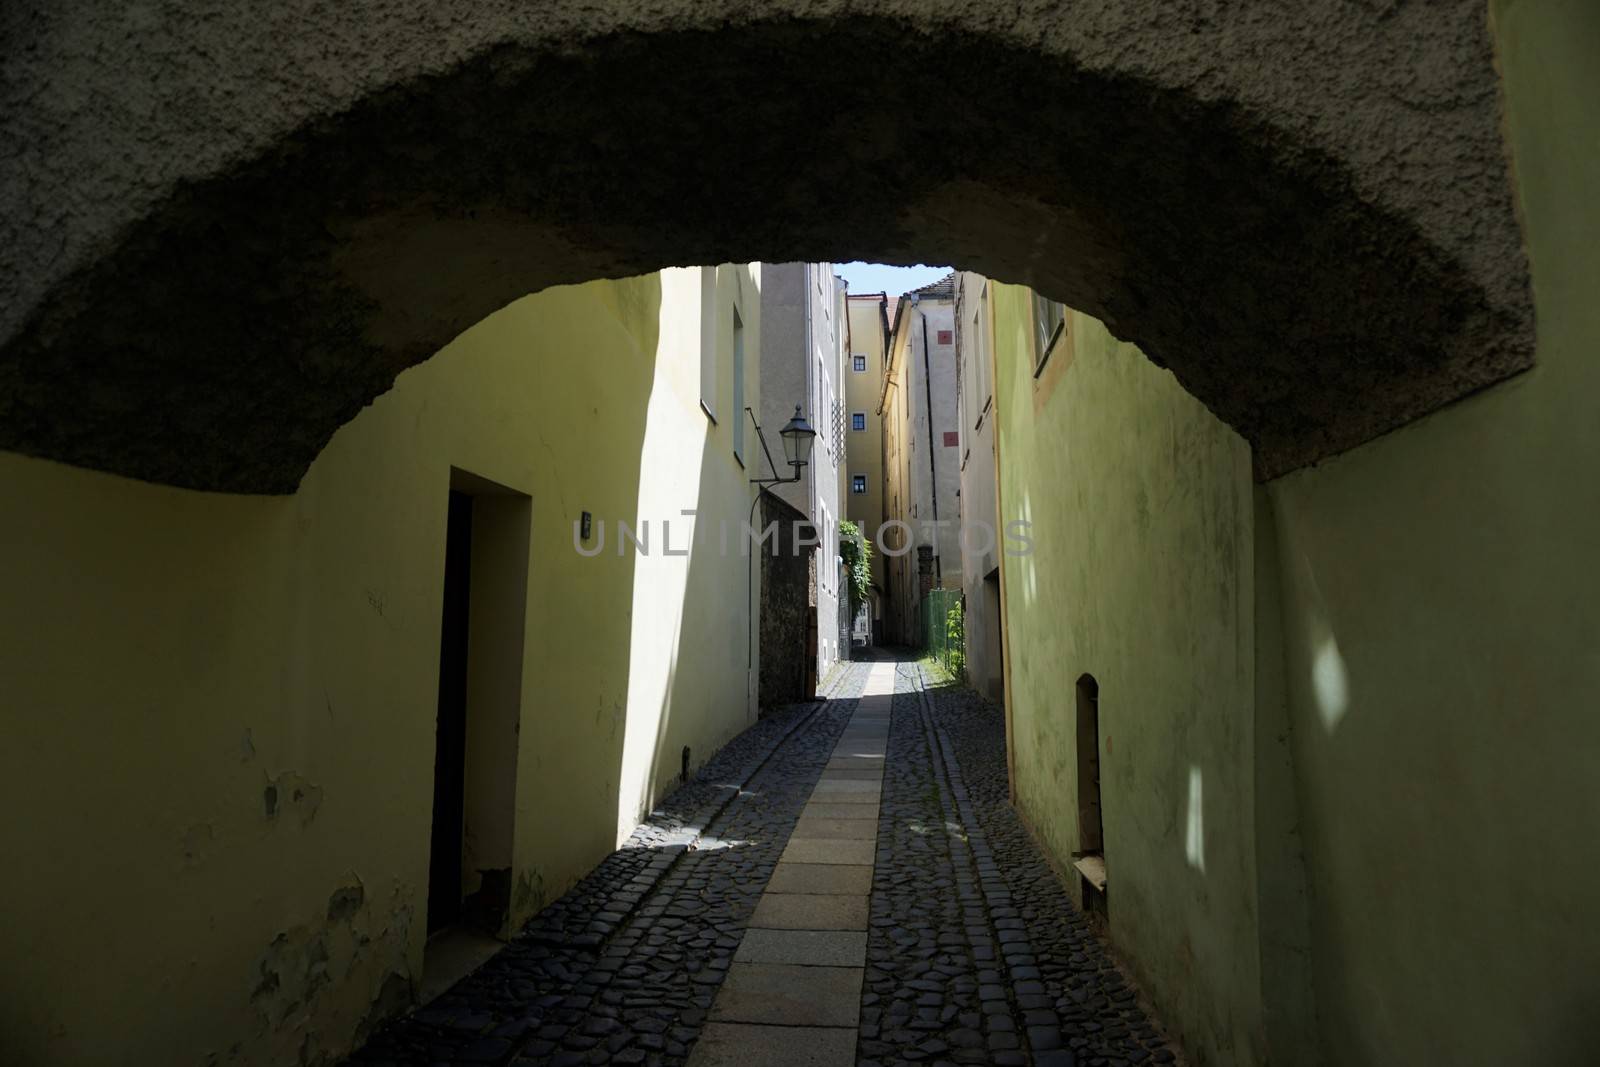 Narrow traitor street in the old town of Goerlitz, Germany